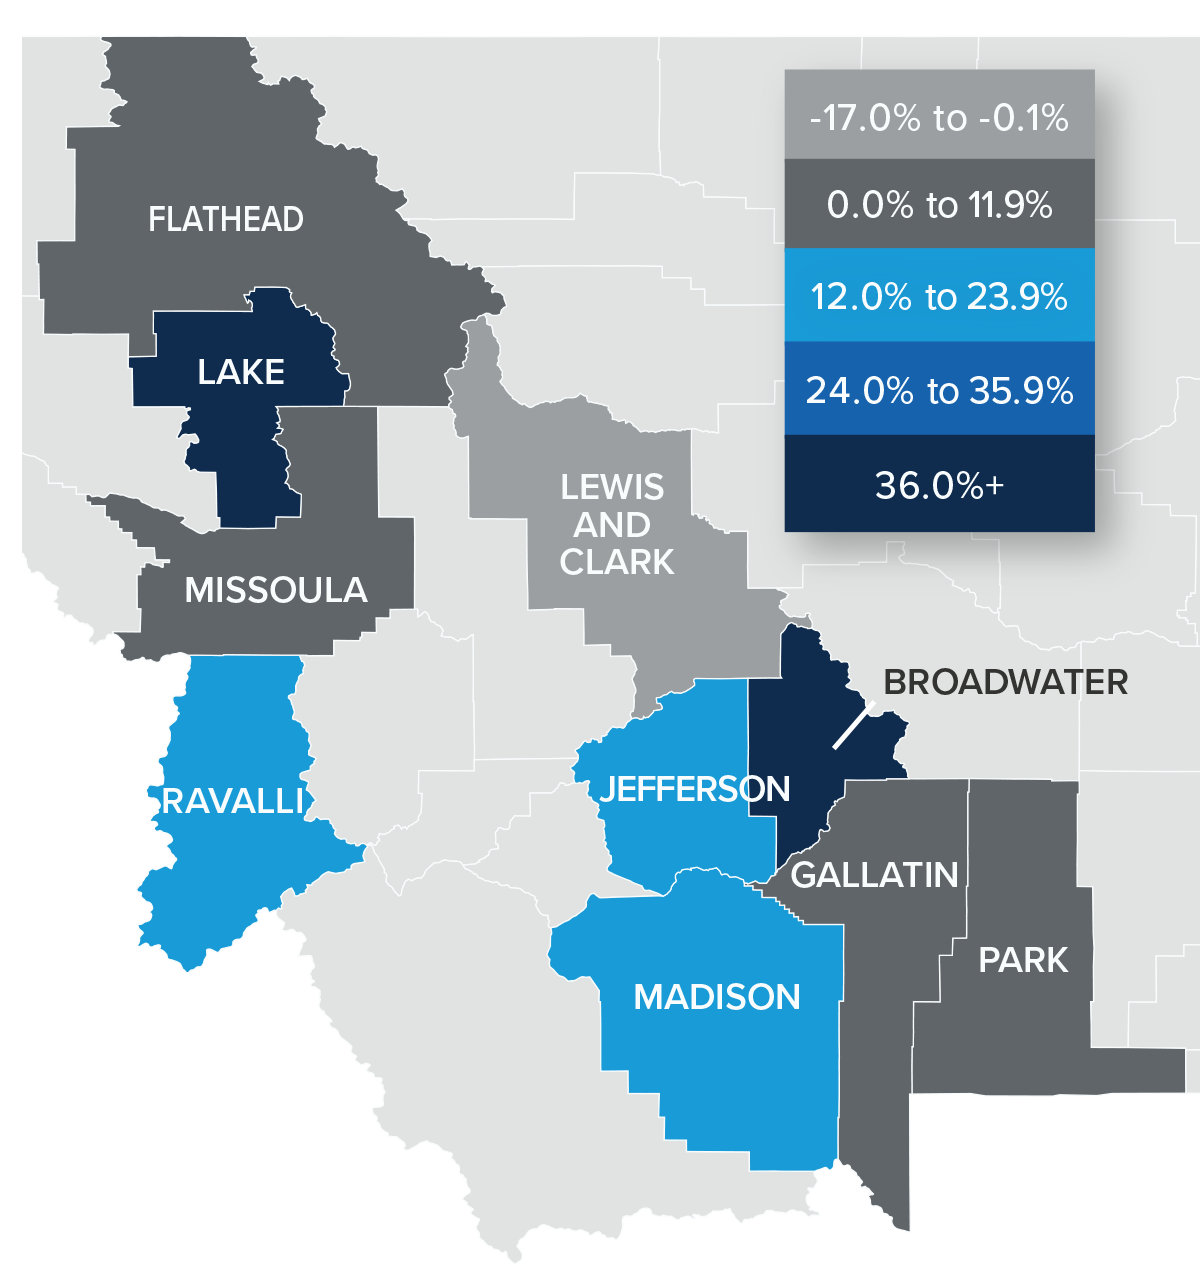 A map showing the real estate home prices percentage changes for various counties in Montana. Different colors correspond to different tiers of percentage change. Lewis and Clark has a percentage change in the -17% to -0.1% range, Flathead, Missoula, Gallatin, and Park are in the 0% to 11.9% change range, Ravalli, Jefferson, and Madison are in the 12% to 23.9% range, and Lake and Broadwater are in the 36%+ change range.